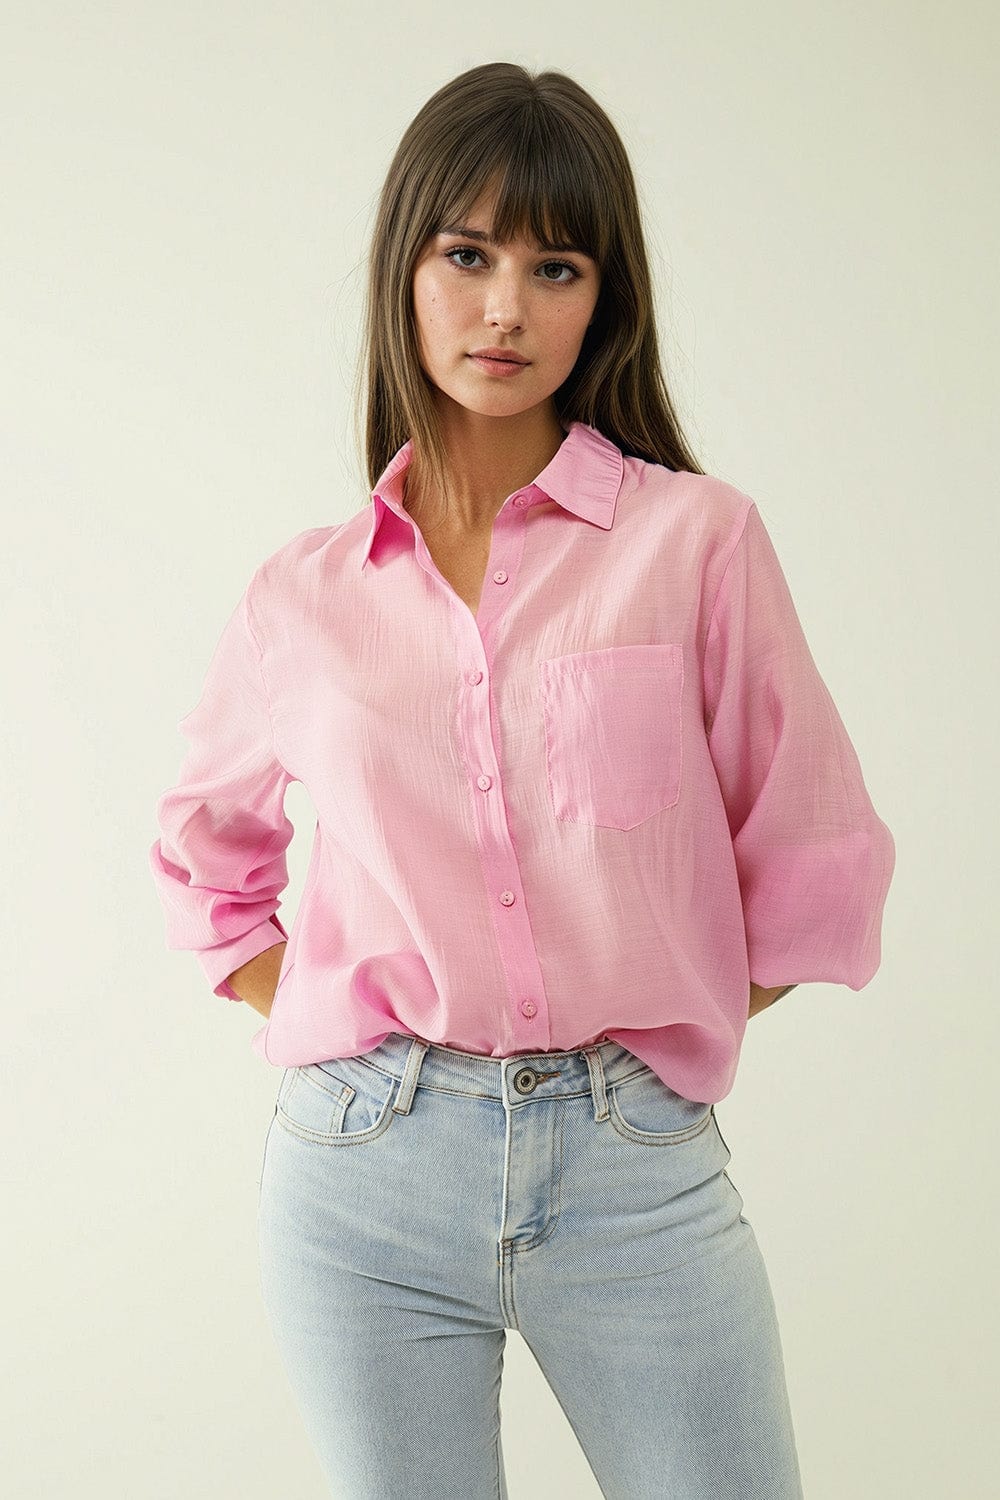 Q2 Women's Blouse Pink Chiffon Shirt With Long Sleeves And One Chest Pocket